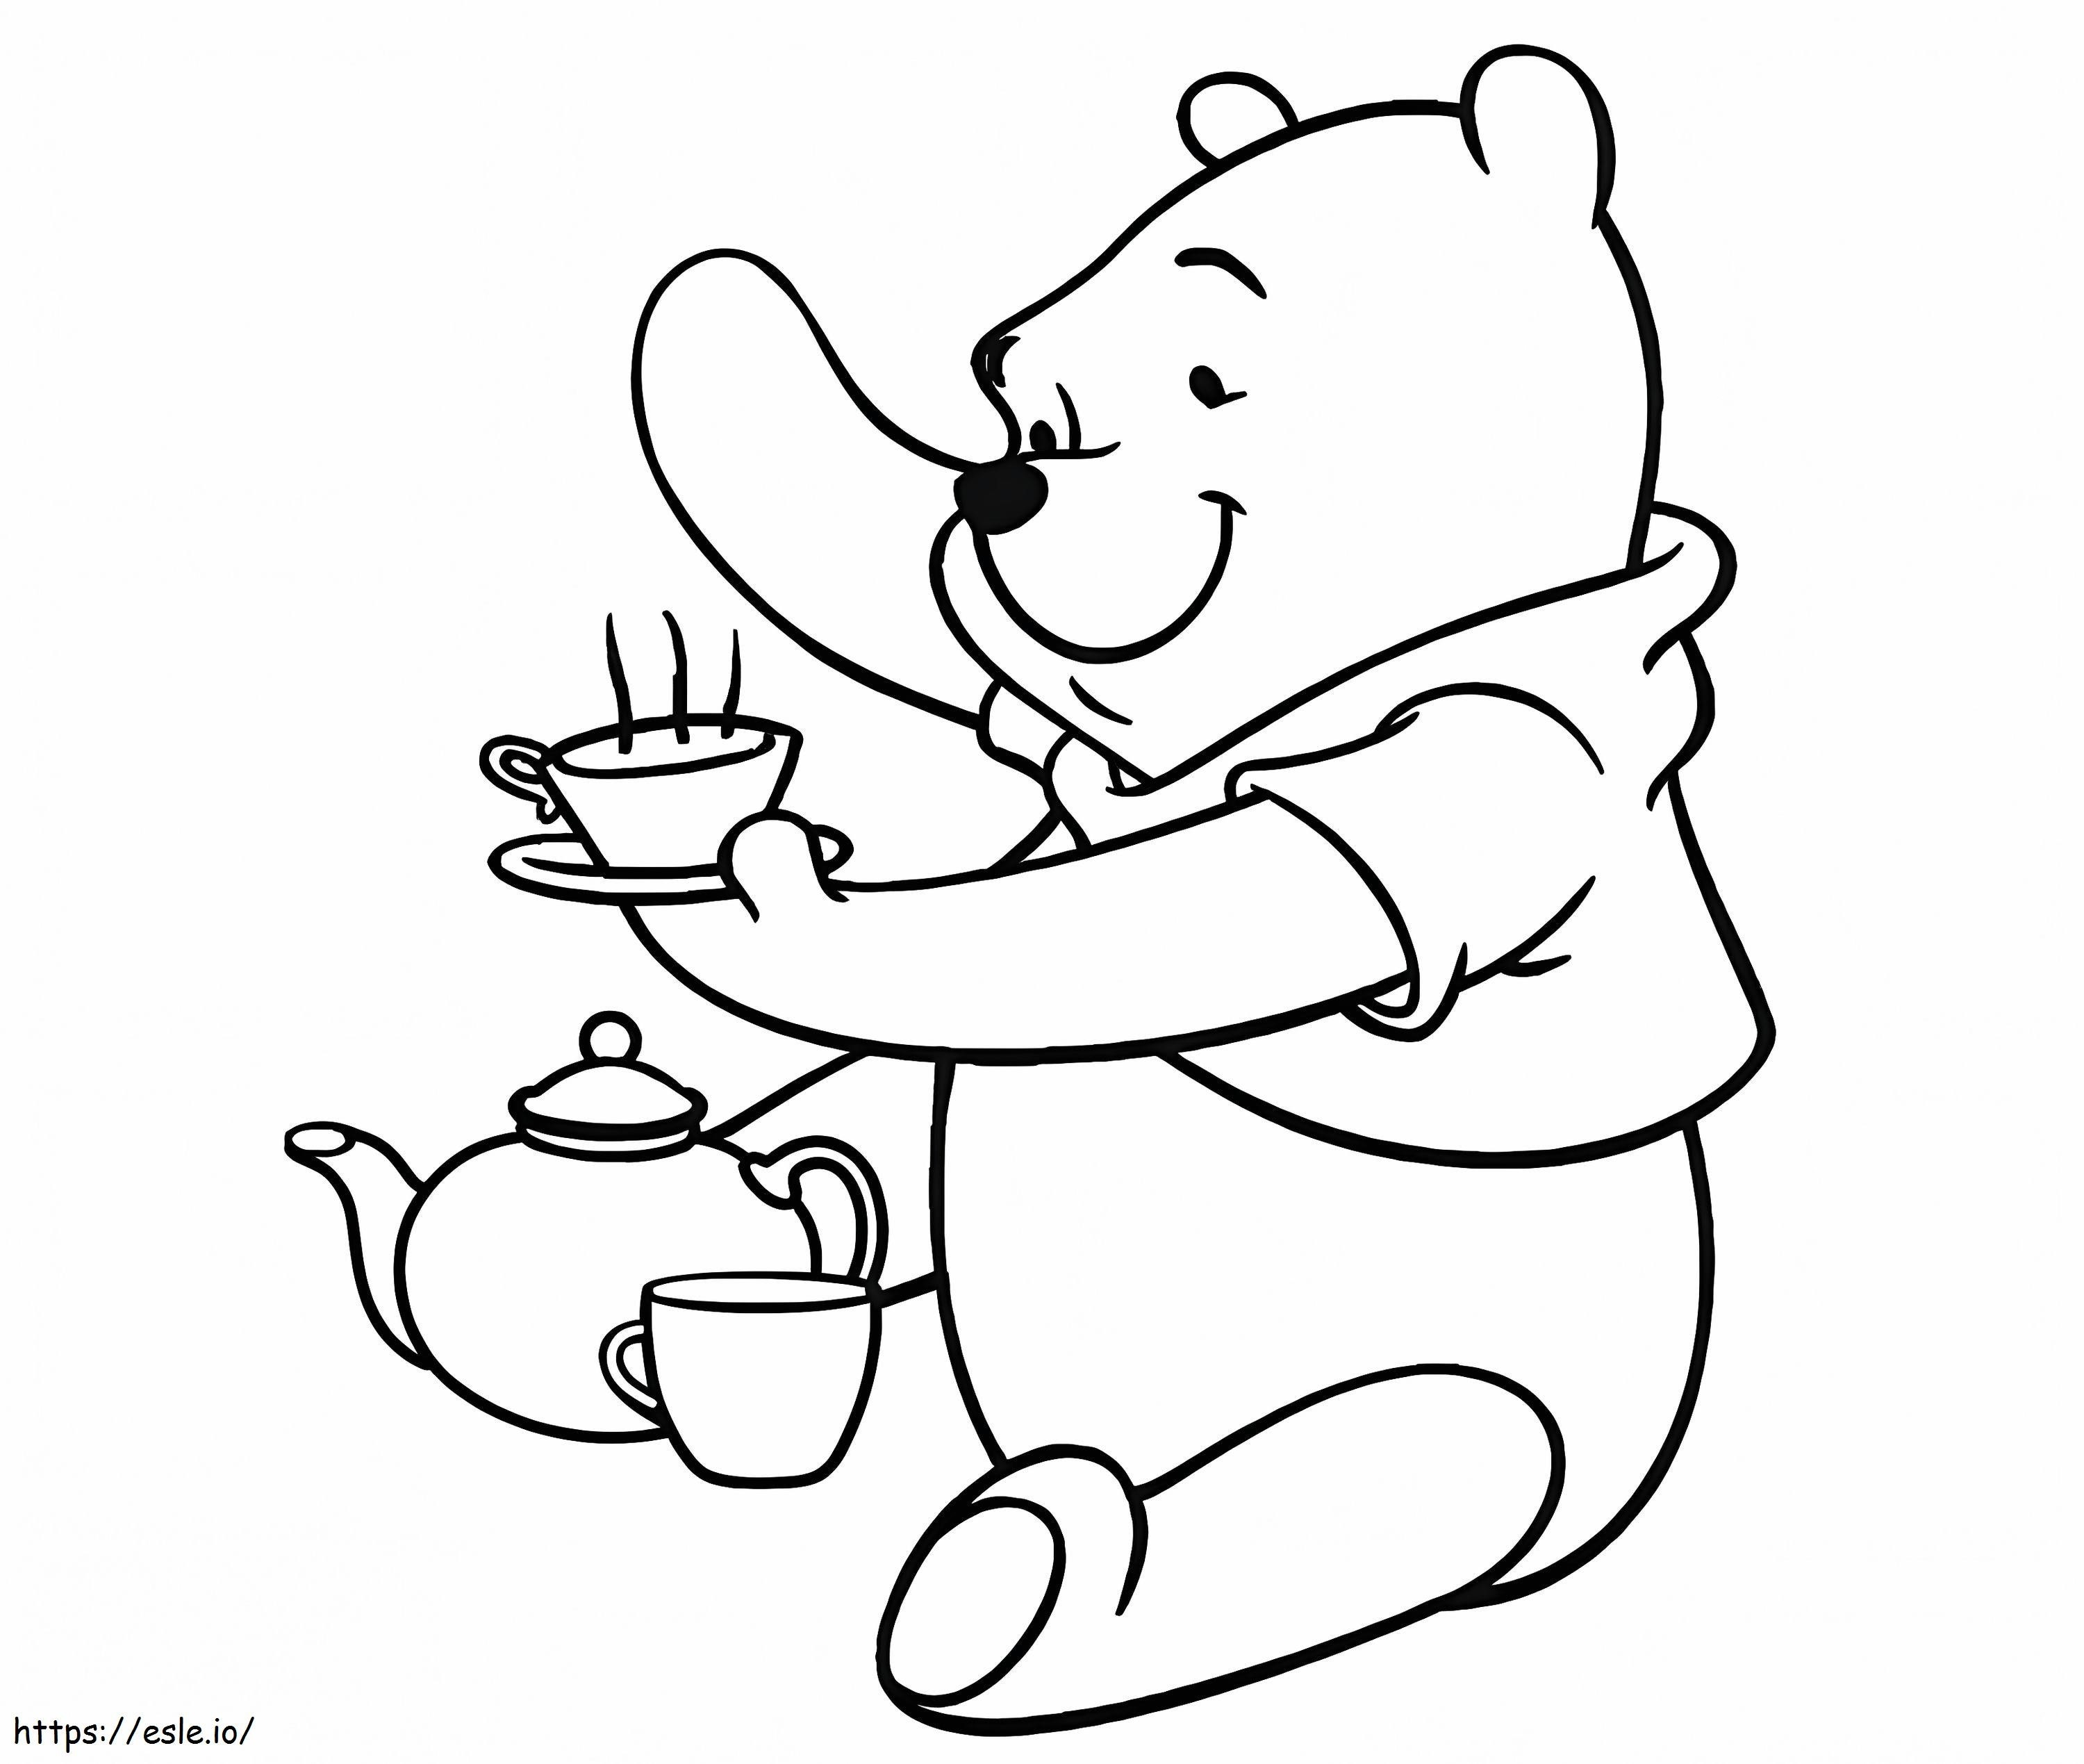 Simple Winnie The Pooh coloring page